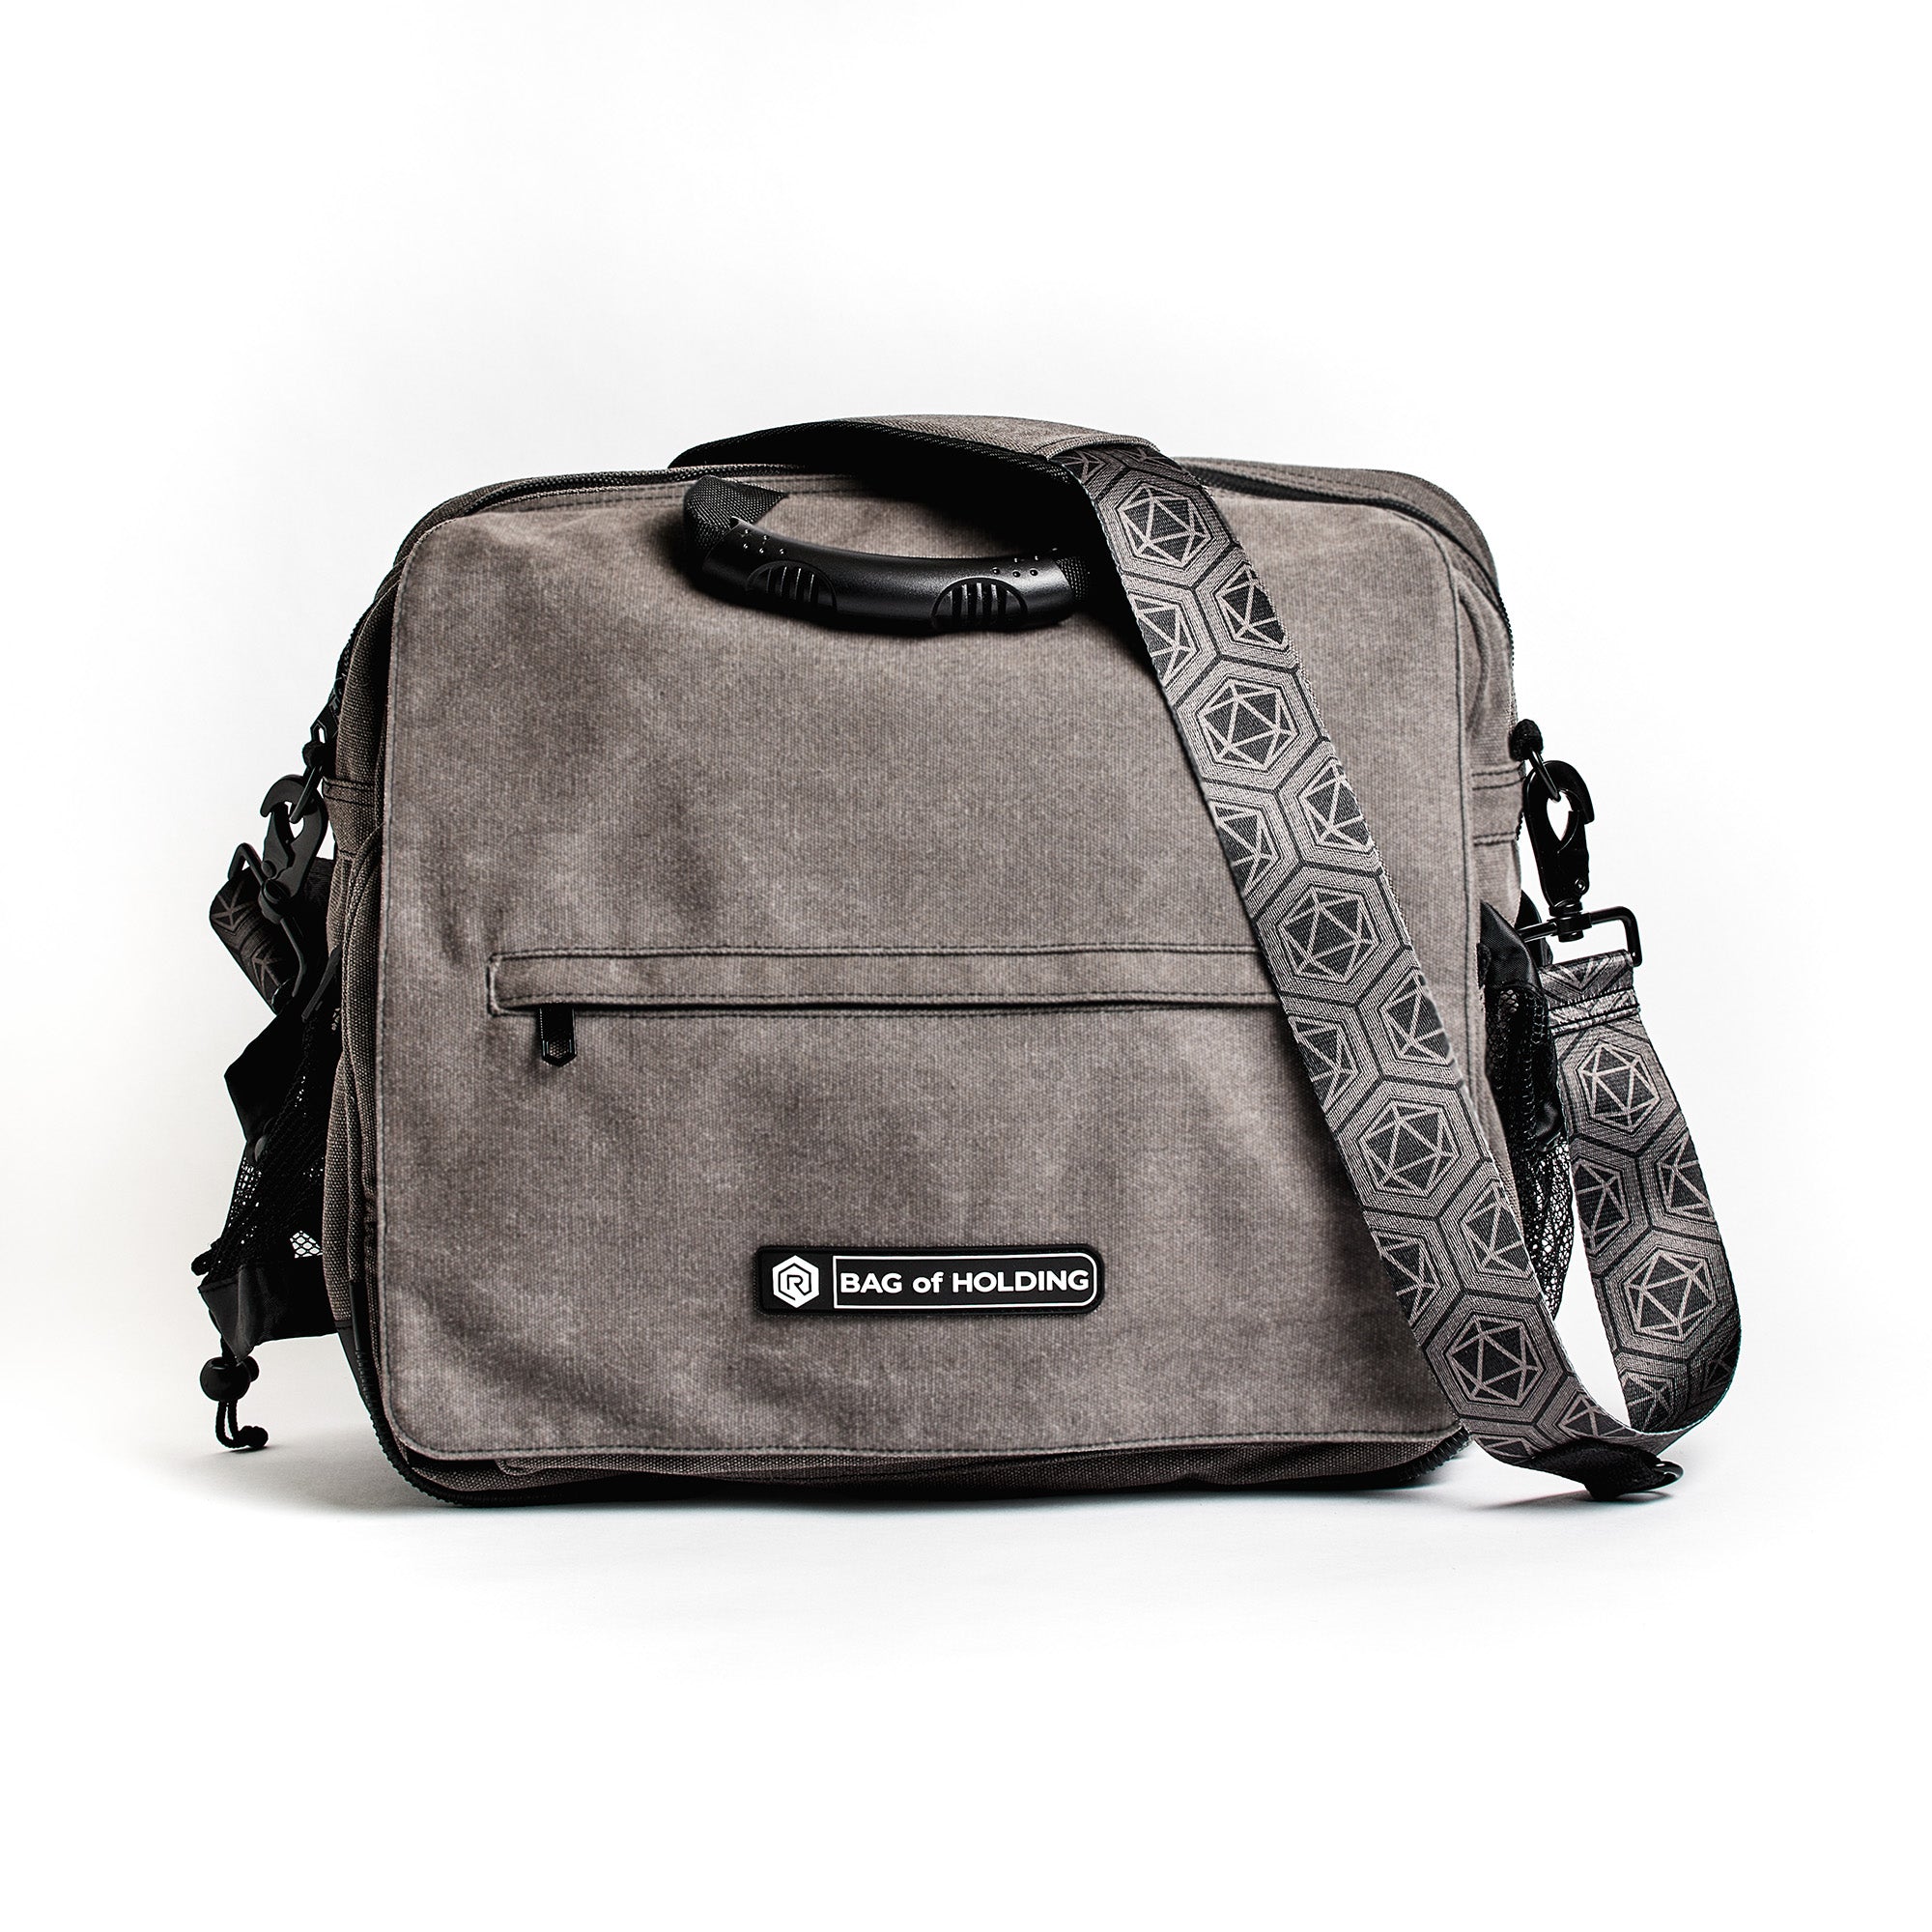 Rollacrit Messenger Bag of Holding | Rollacrit